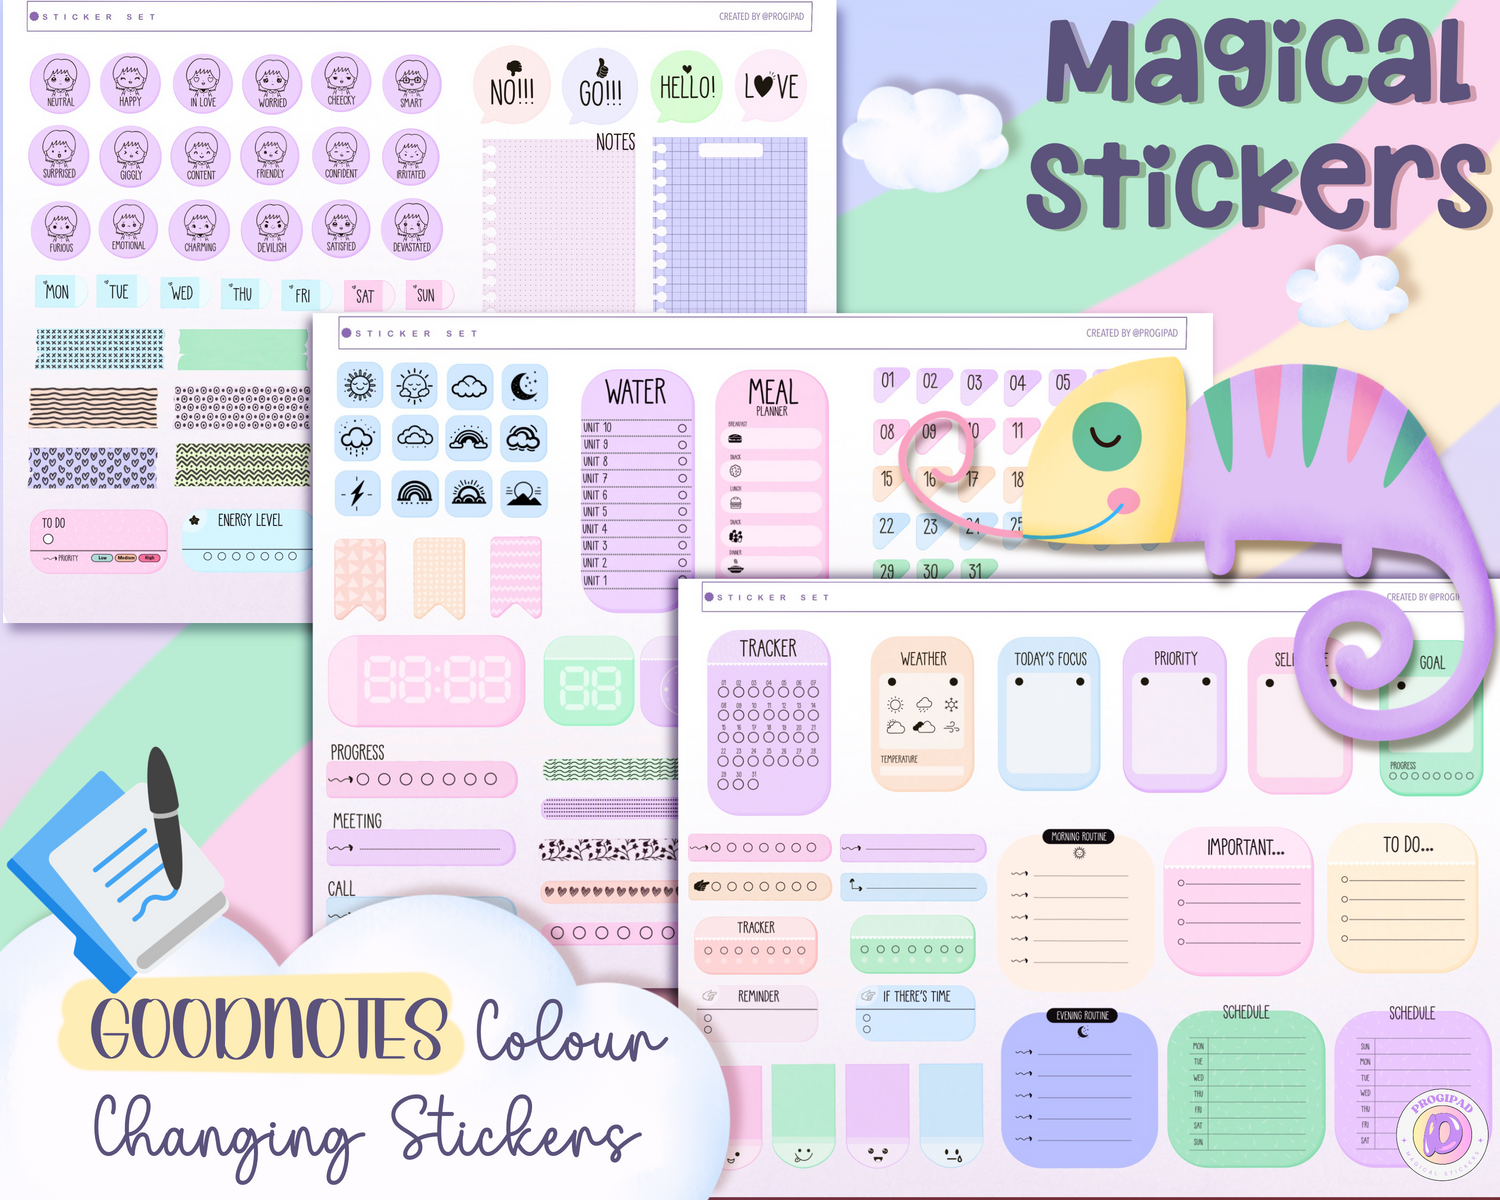 Magical stickers, colour changing stickers for Goodnotes, Basic widget edition.